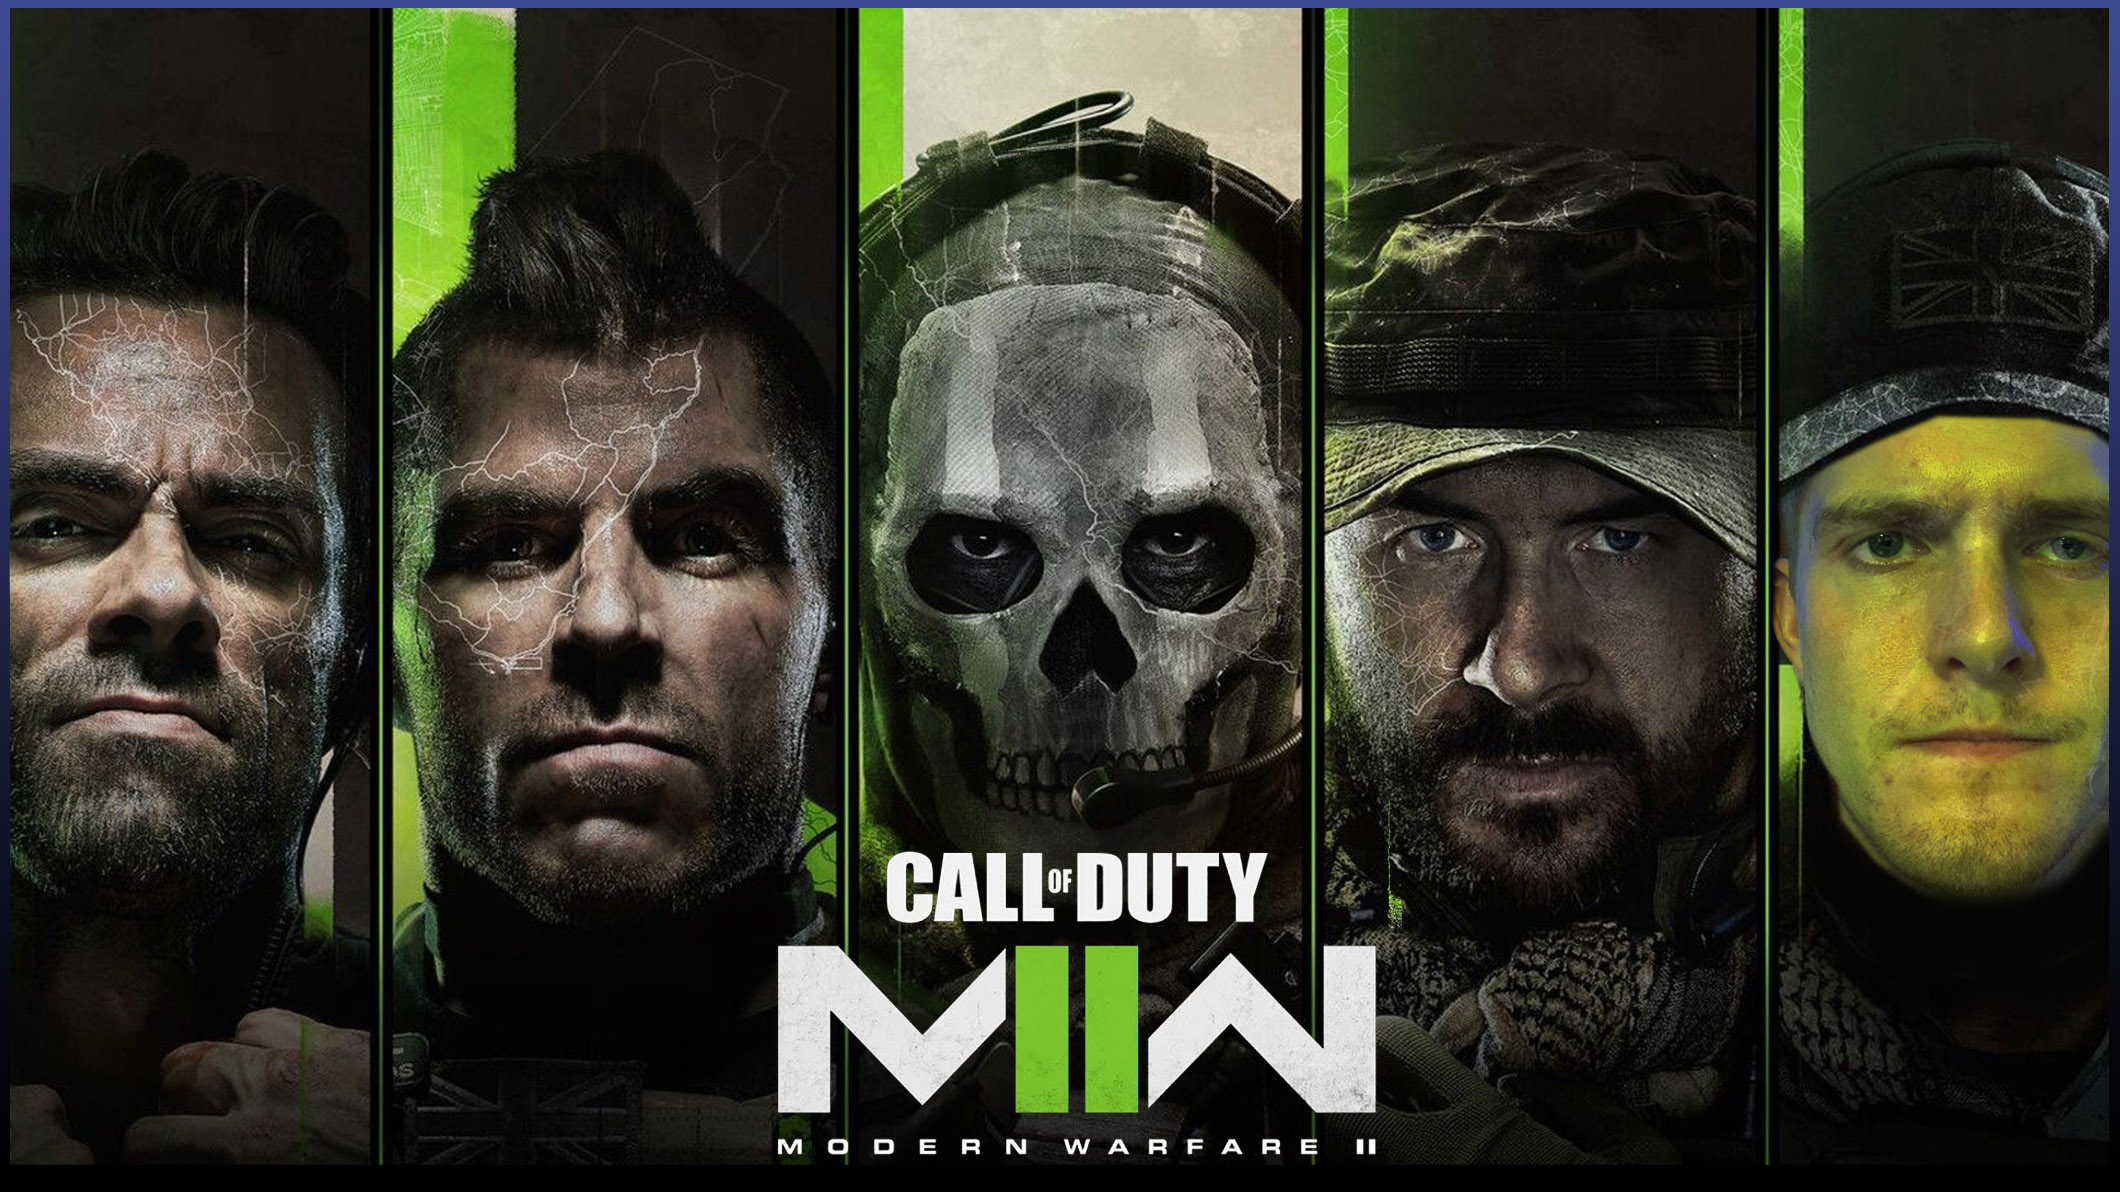 Steam must be running to play this game call of duty modern warfare фото 13